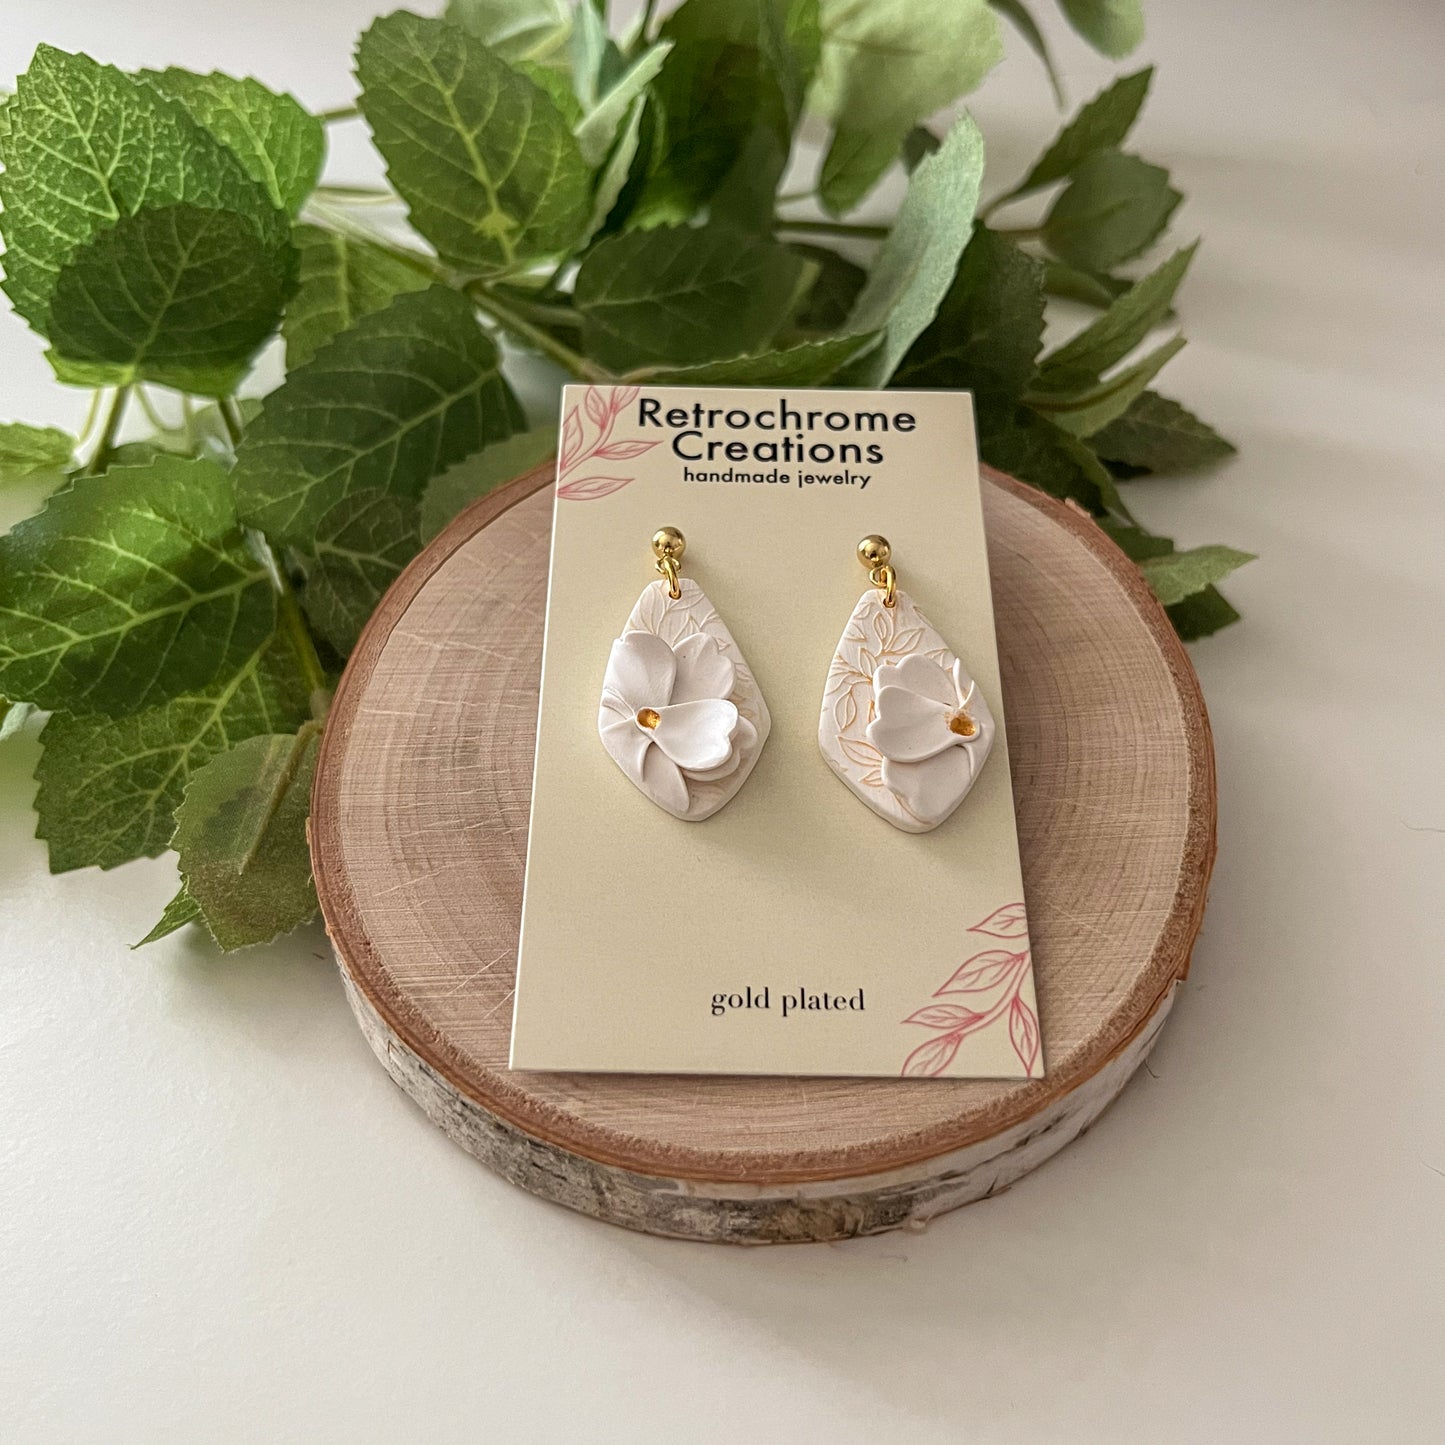 Small white and gold floral earrings | 24k gold plated